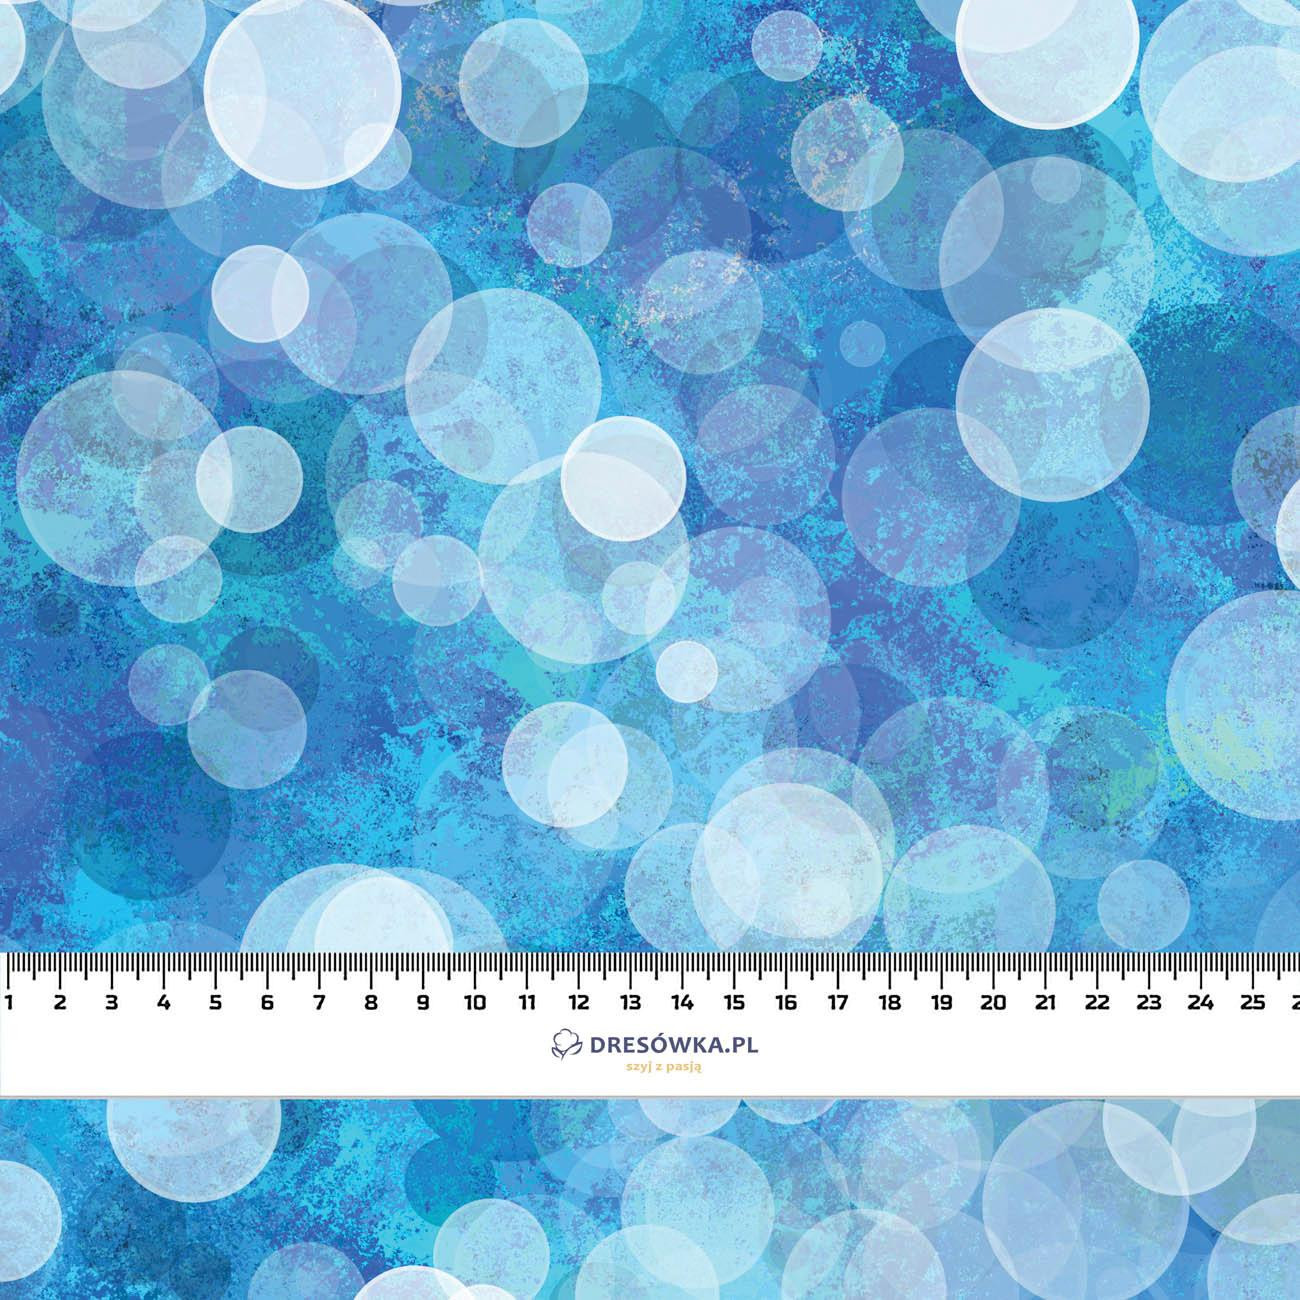 WINTER BOKEH (WINTER IS COMING) - brushed knit fabric with teddy / alpine fleece